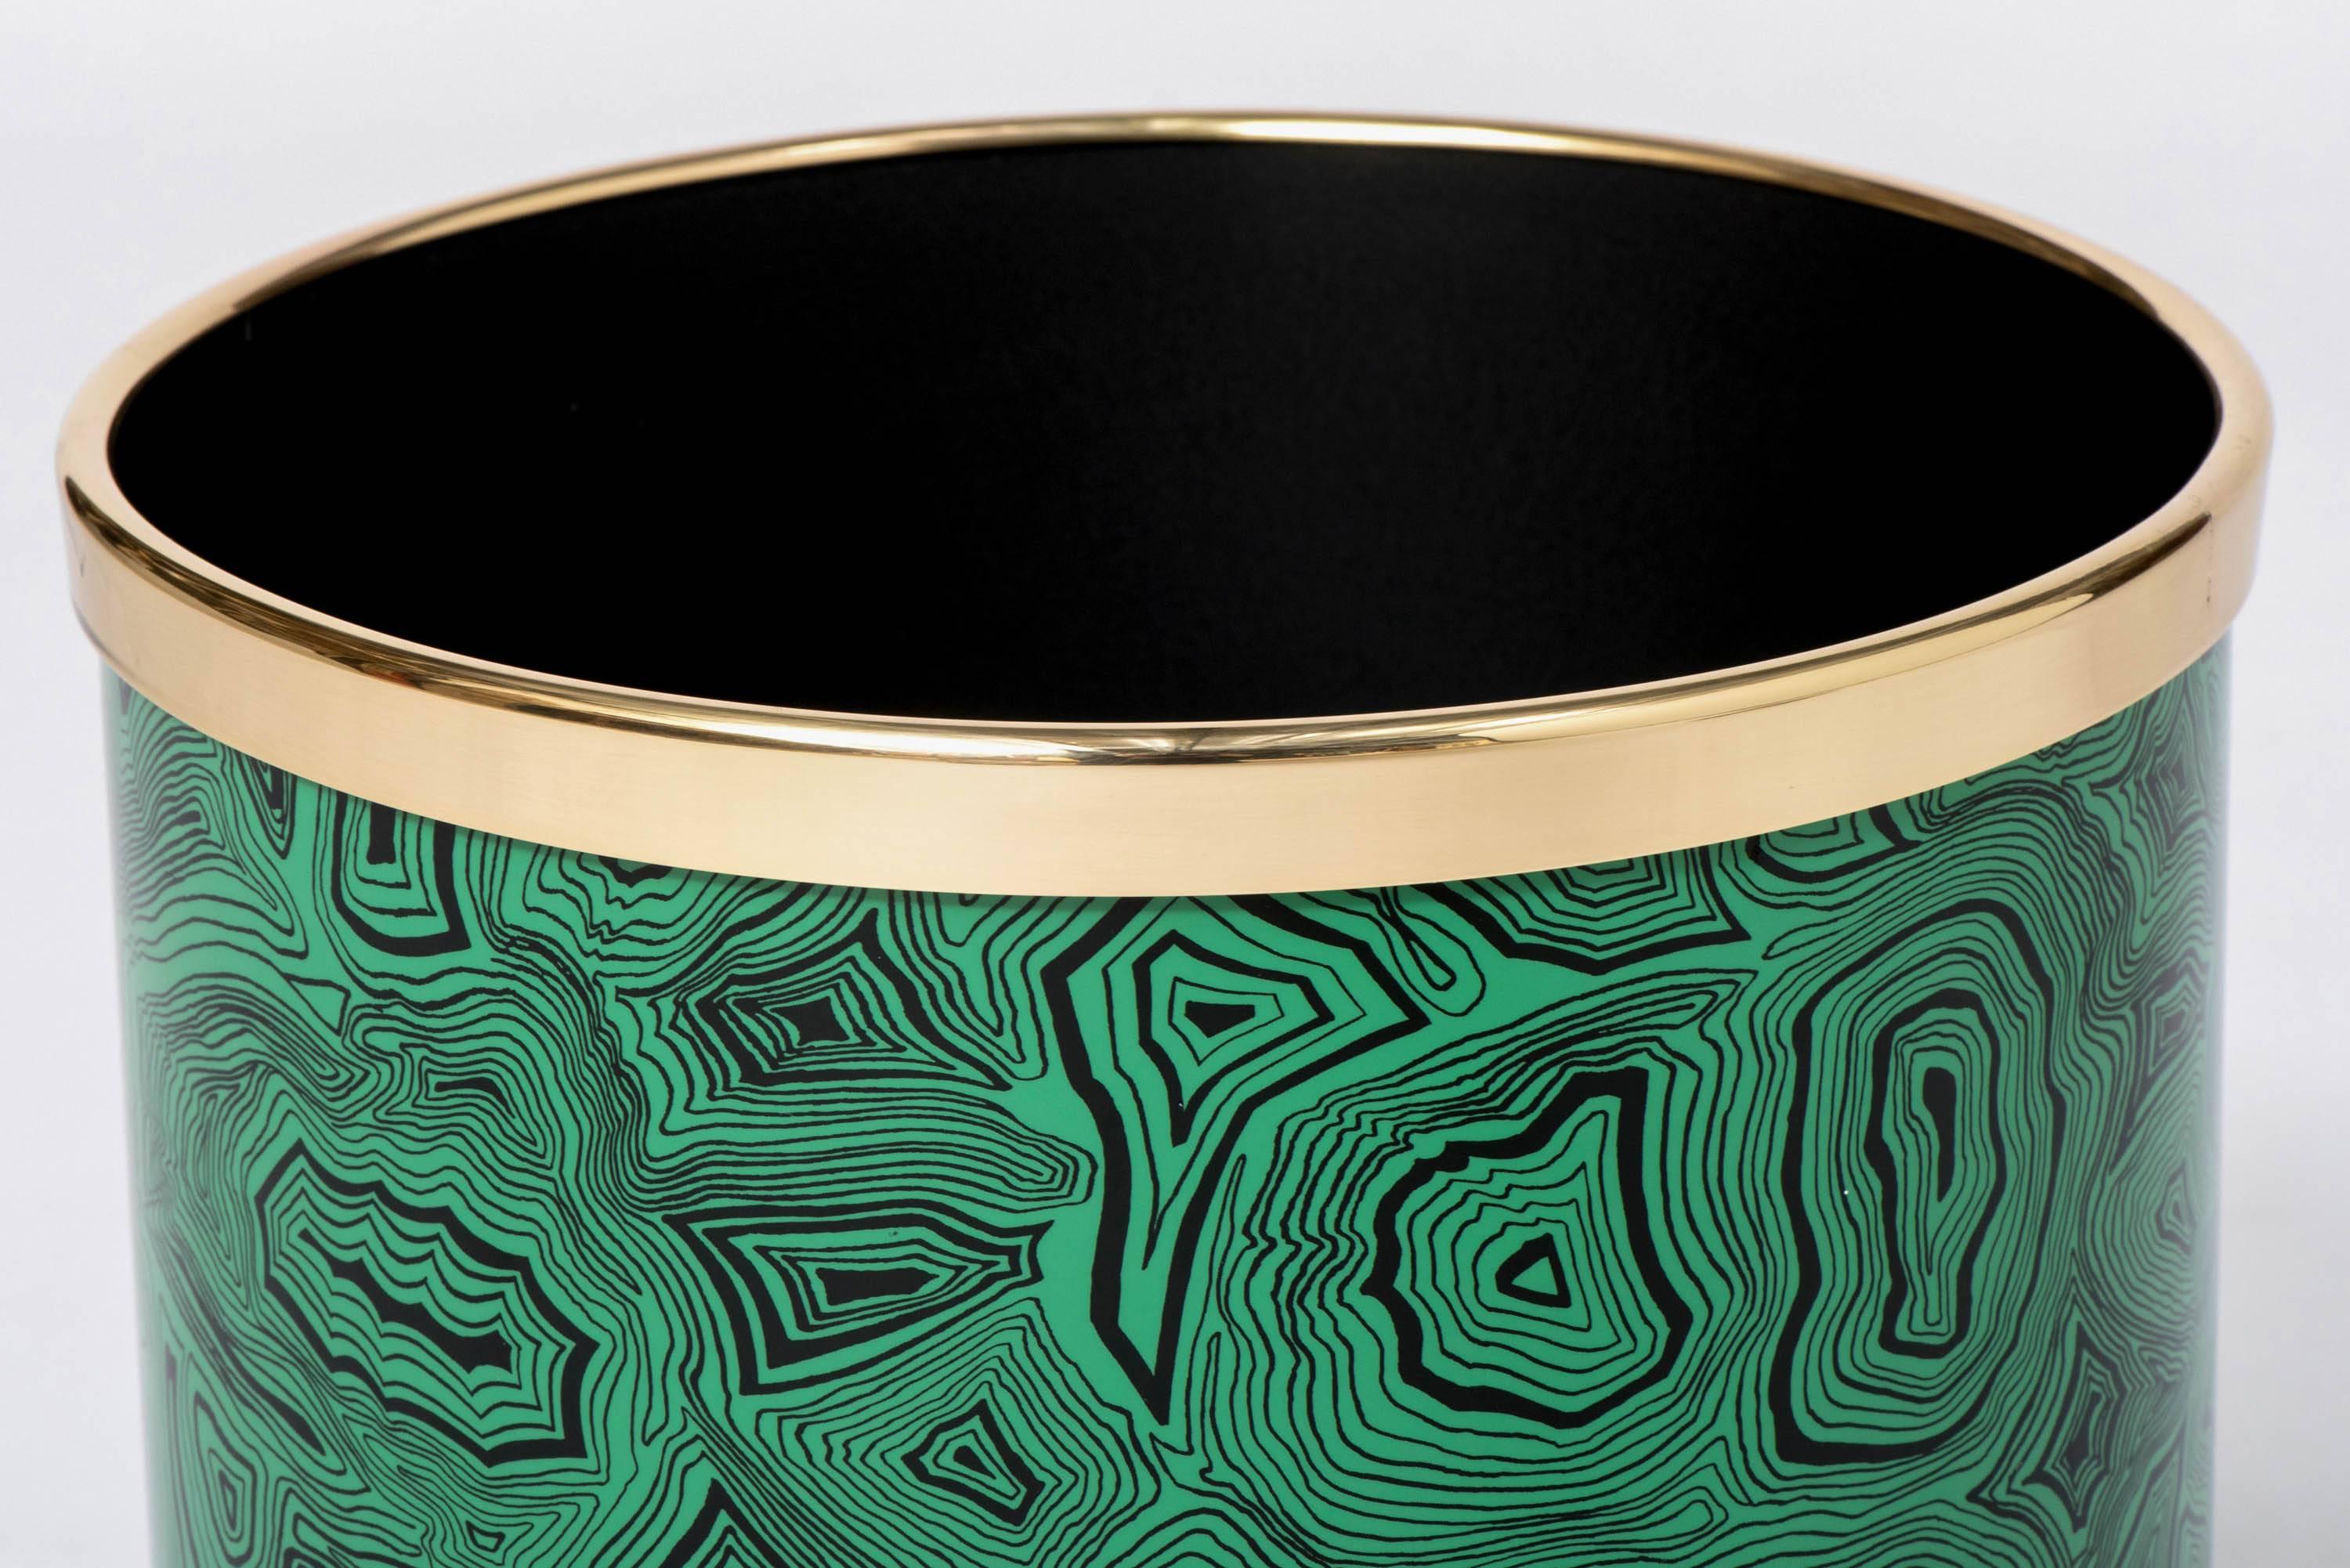 Barnaba Fornasetti paper basket malachite green with chromed details, Italy 2017.
Lithographically printed metal.
28 cm high x 26 cm diameter